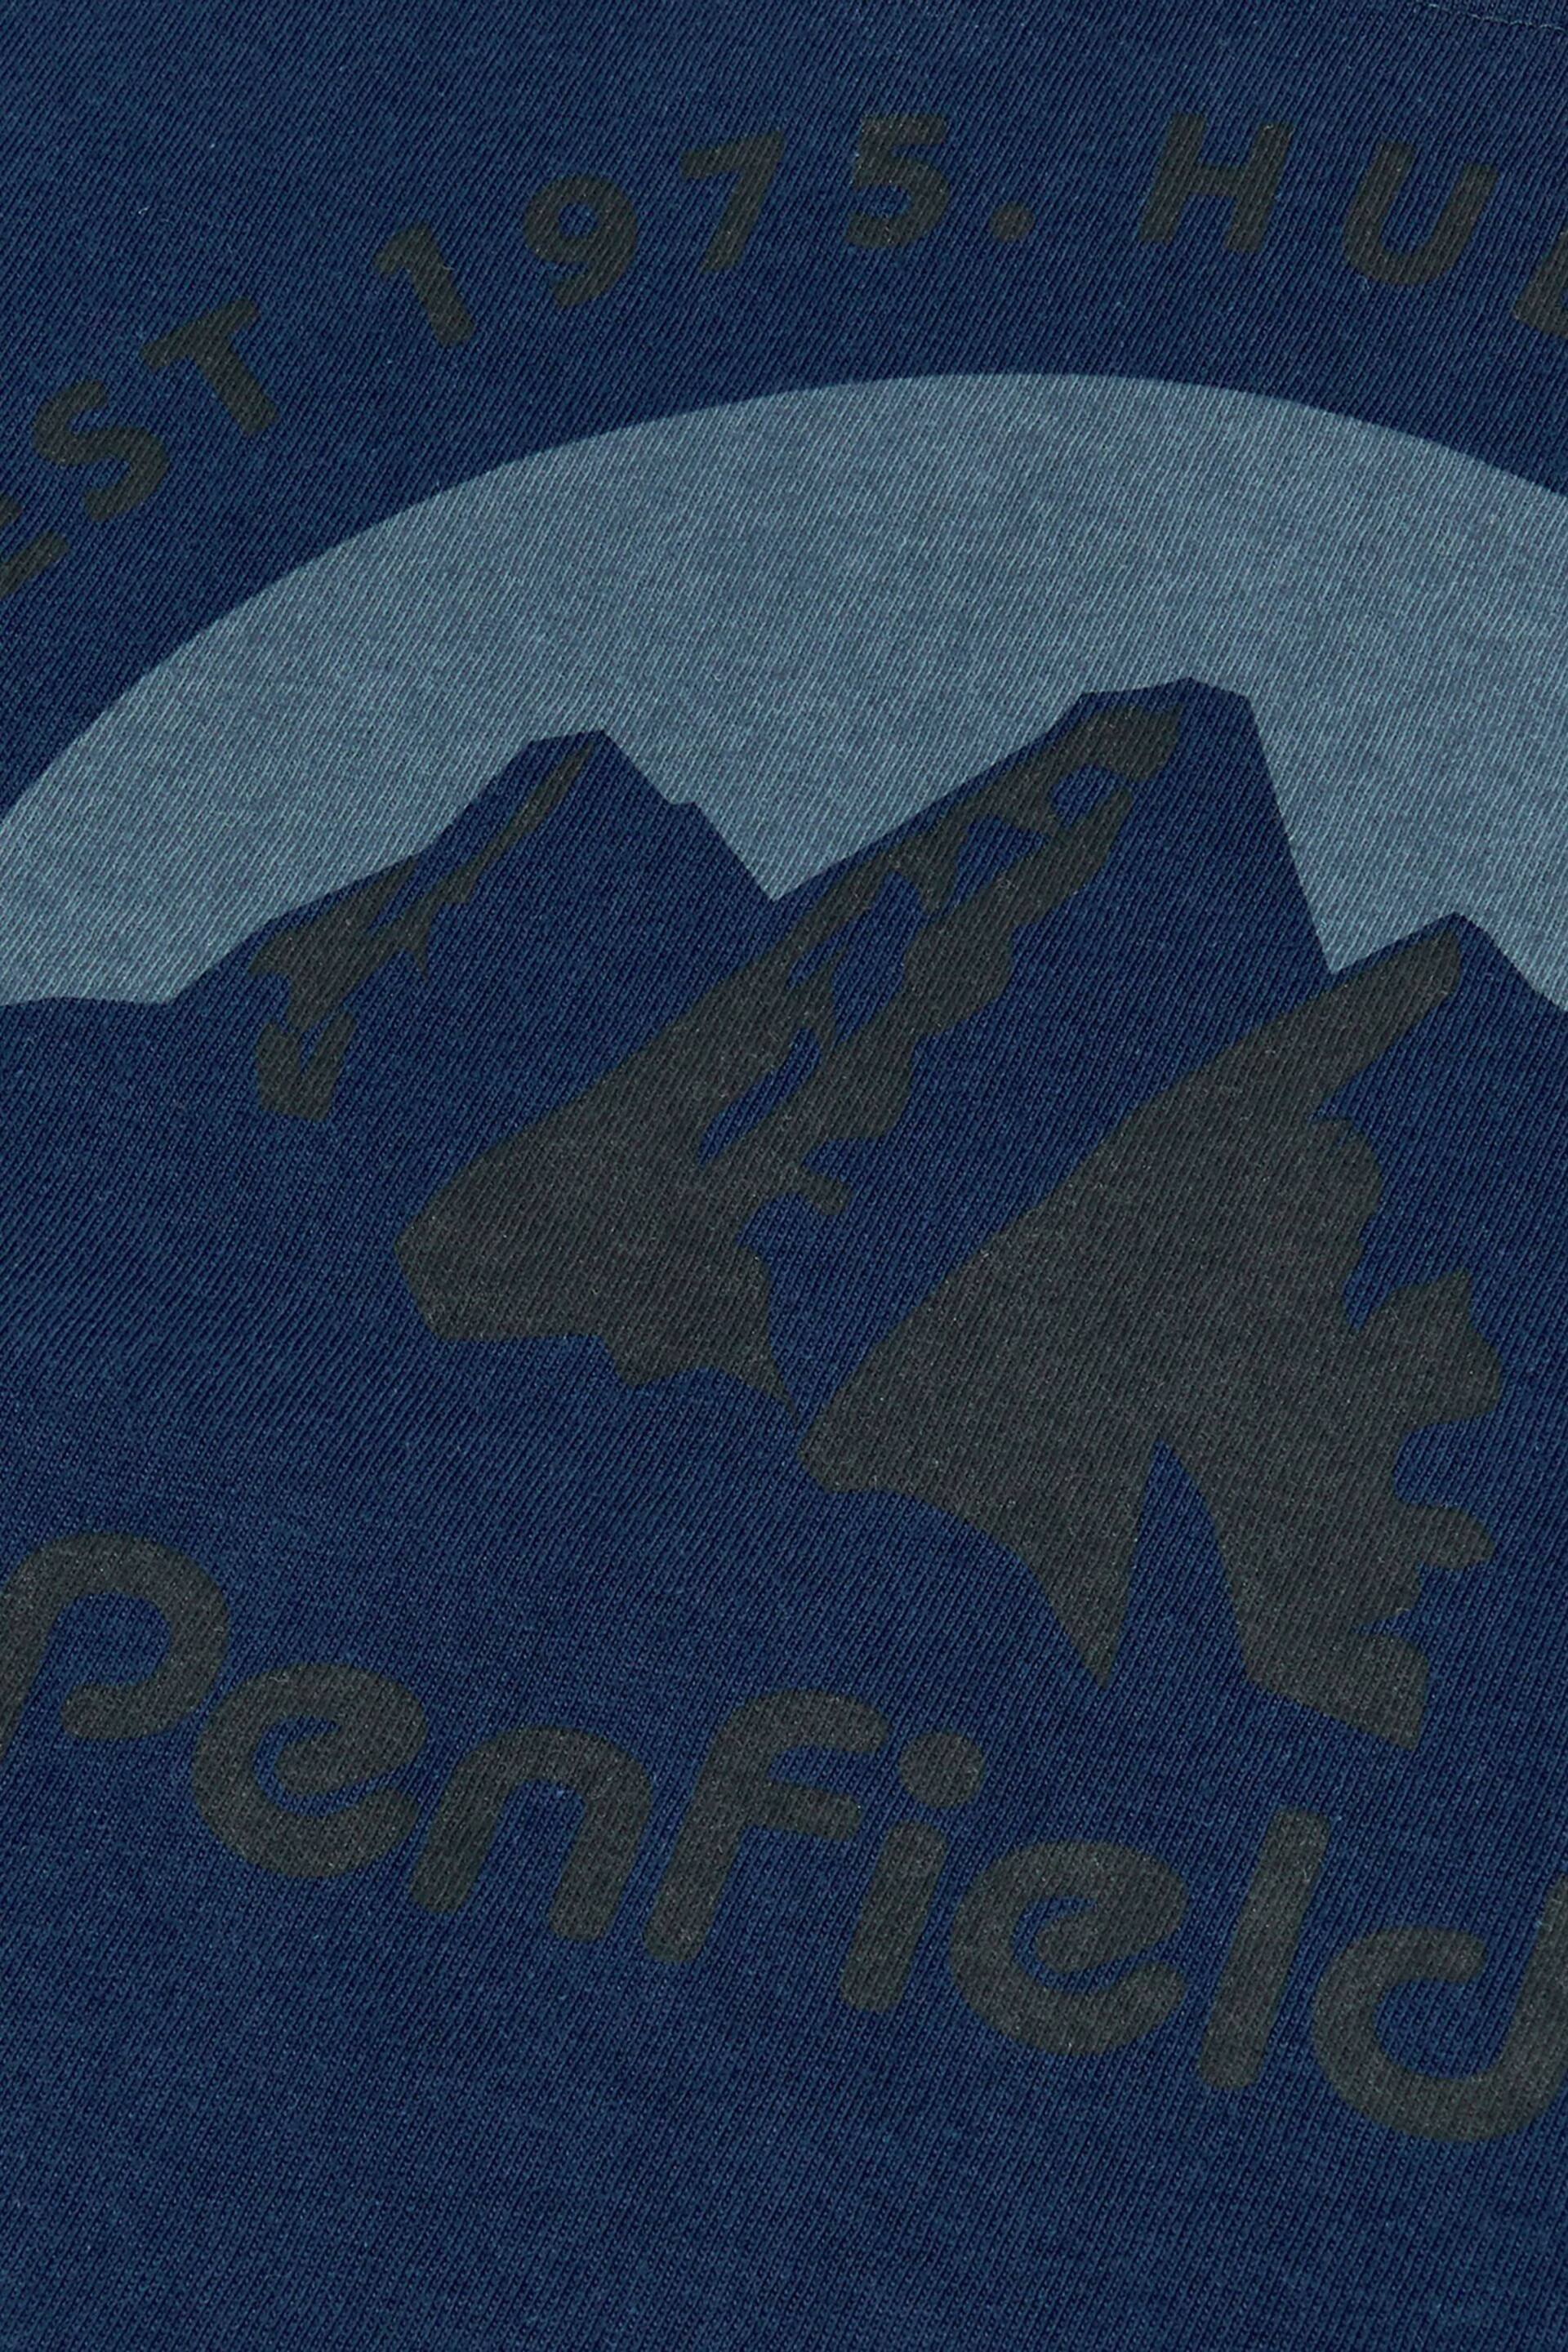 Penfield Blue Arc Mountain Back Graphic Long-Sleeved T-Shirt - Image 10 of 10